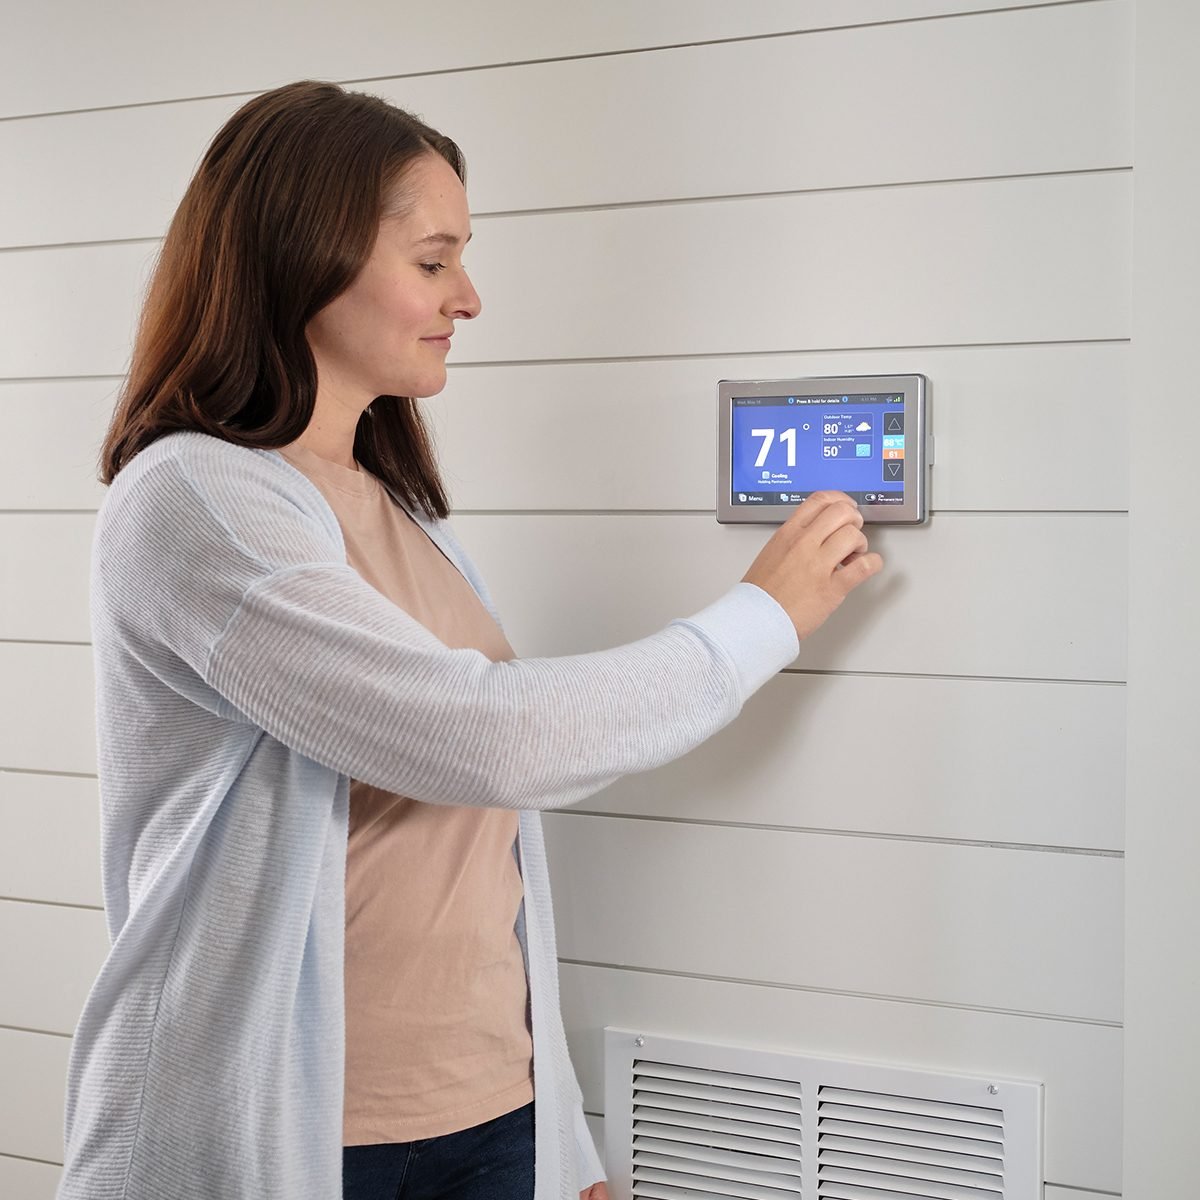 8 Tips to Help Troubleshoot Your HVAC Problems